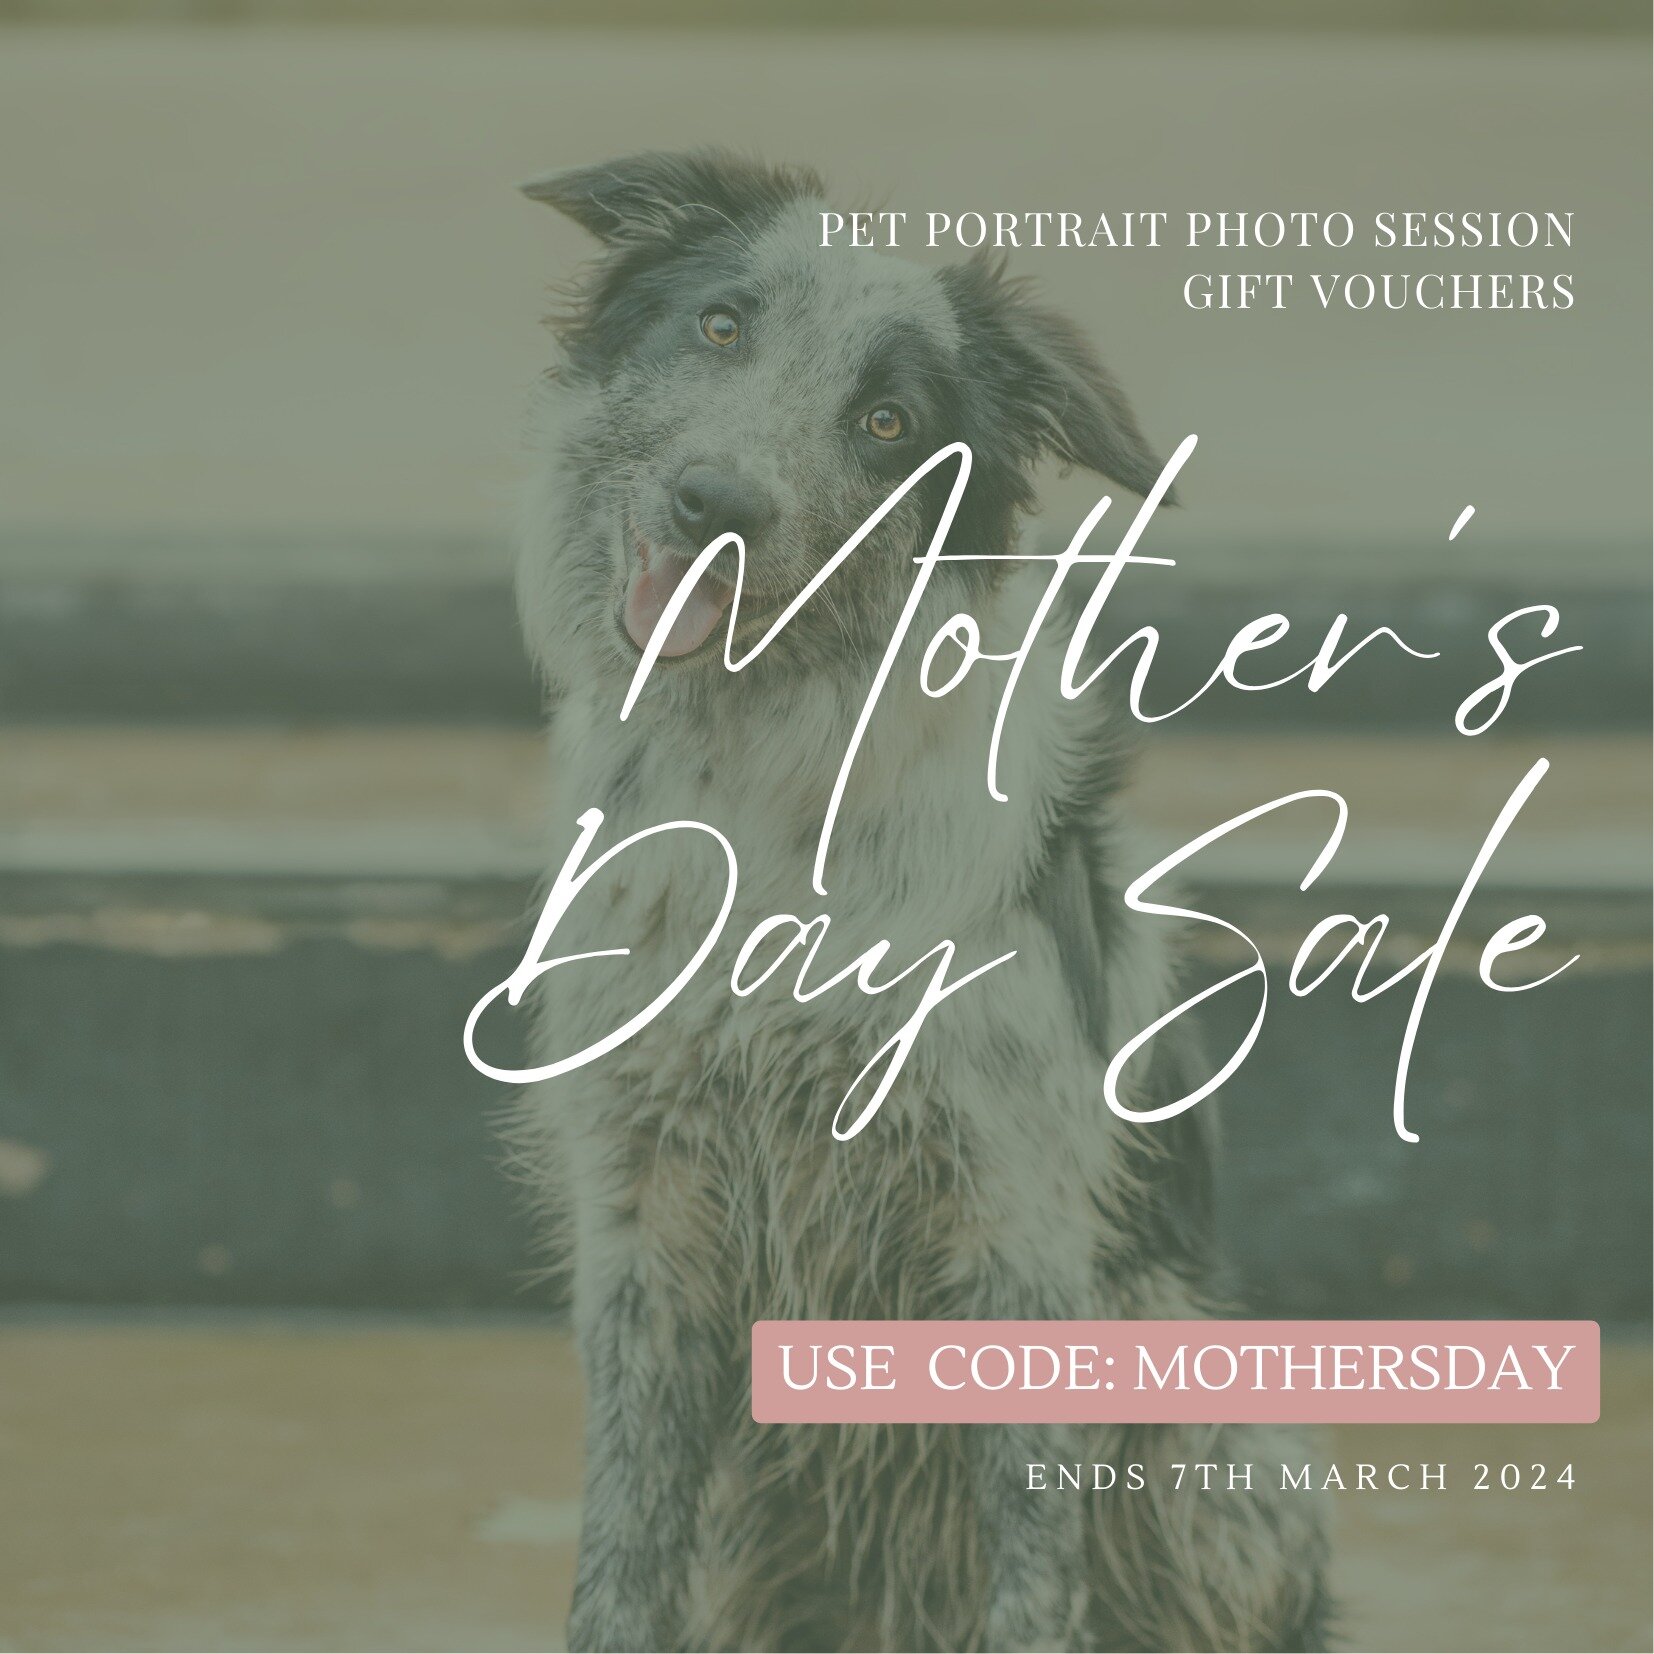 🌻 This Mother&rsquo;s Day, give the gift of cherished memories with our Professional Pet Portrait Photo Session! 📸🐾

This special season, treat your mother to an experience that lasts a lifetime. Our gift vouchers make the perfect present for anyo